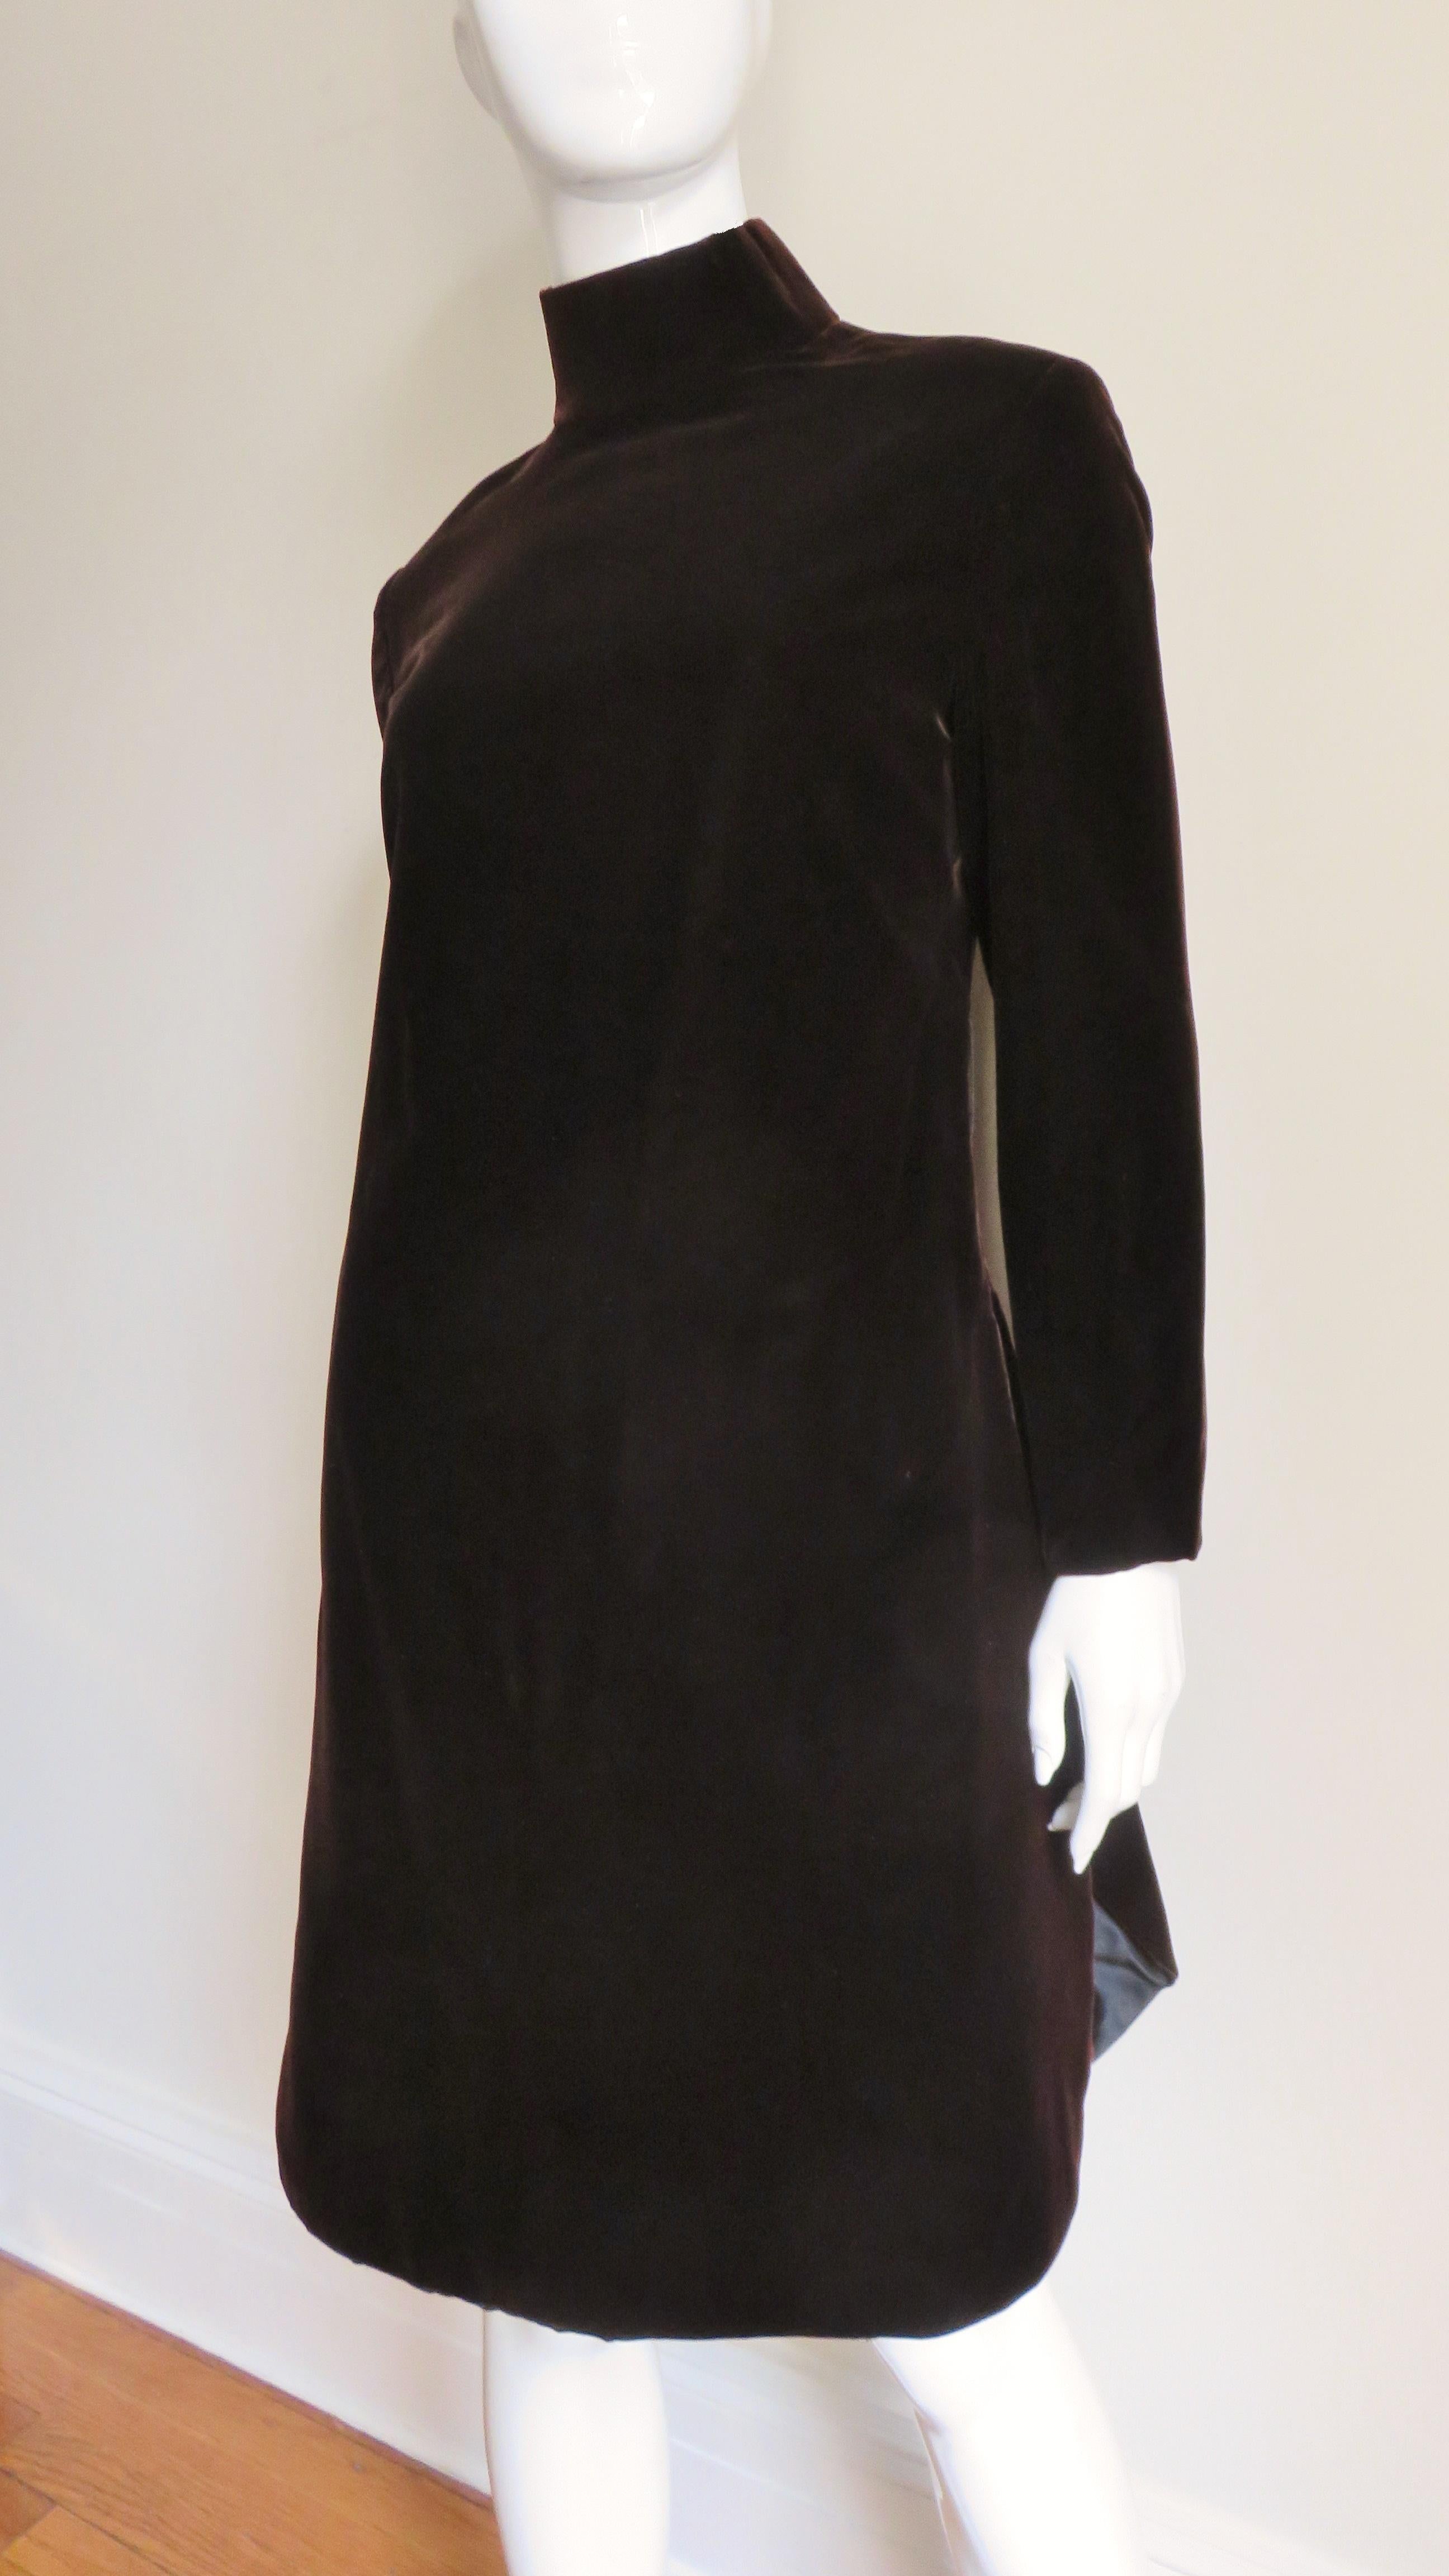 A rich brown velvet dress from Pierre Cardin.  It has a standup collar, long sleeves and a shirt tail hemline which reveals the straight black silk skirt underneath at the sides.  It comes with a wired gold lurex tie, is fully lined in black silk